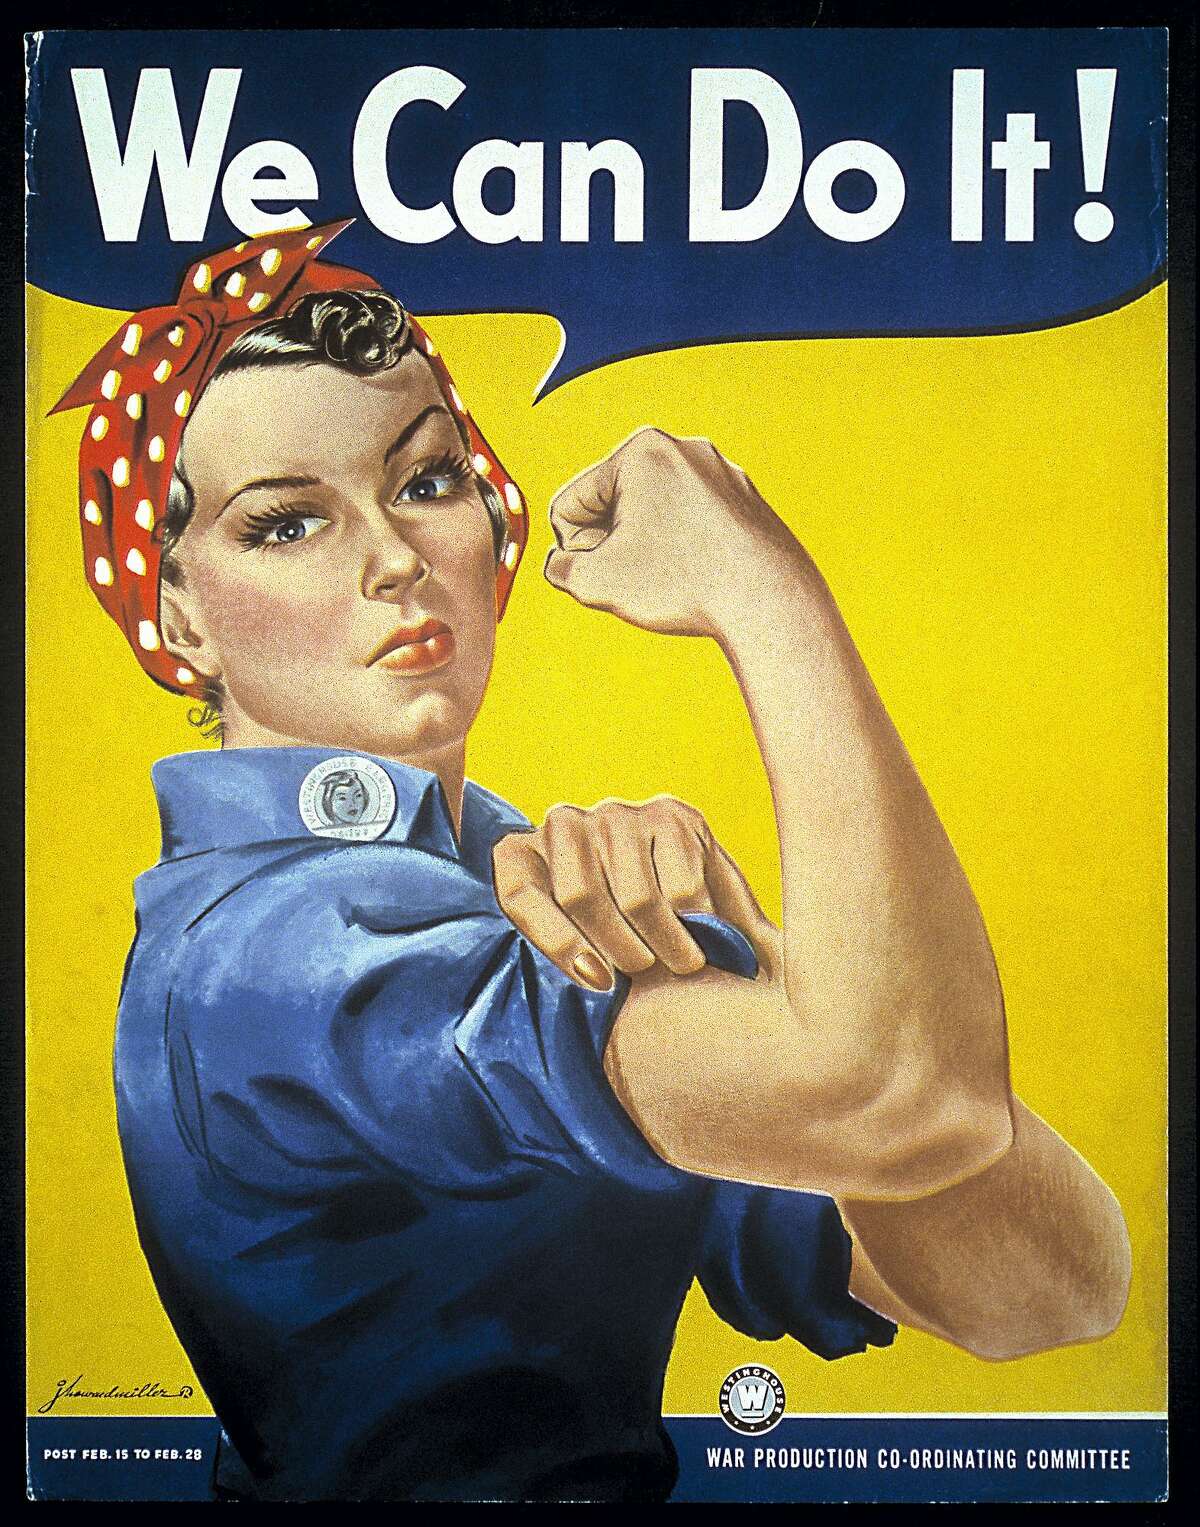 A free, illustrated lecture on the real story of Rosie the Riveter will be presented by Historian and Director of Education at the New England Air Museum in Windsor Locks, Amanda Goodheart Parks, Ph.D., at 7 p.m. March 19 at the Essex Library, 33 West Ave. Parks will focus on Rosie’s journey from propaganda poster to feminist icon. RSVP: 860 767-1560.